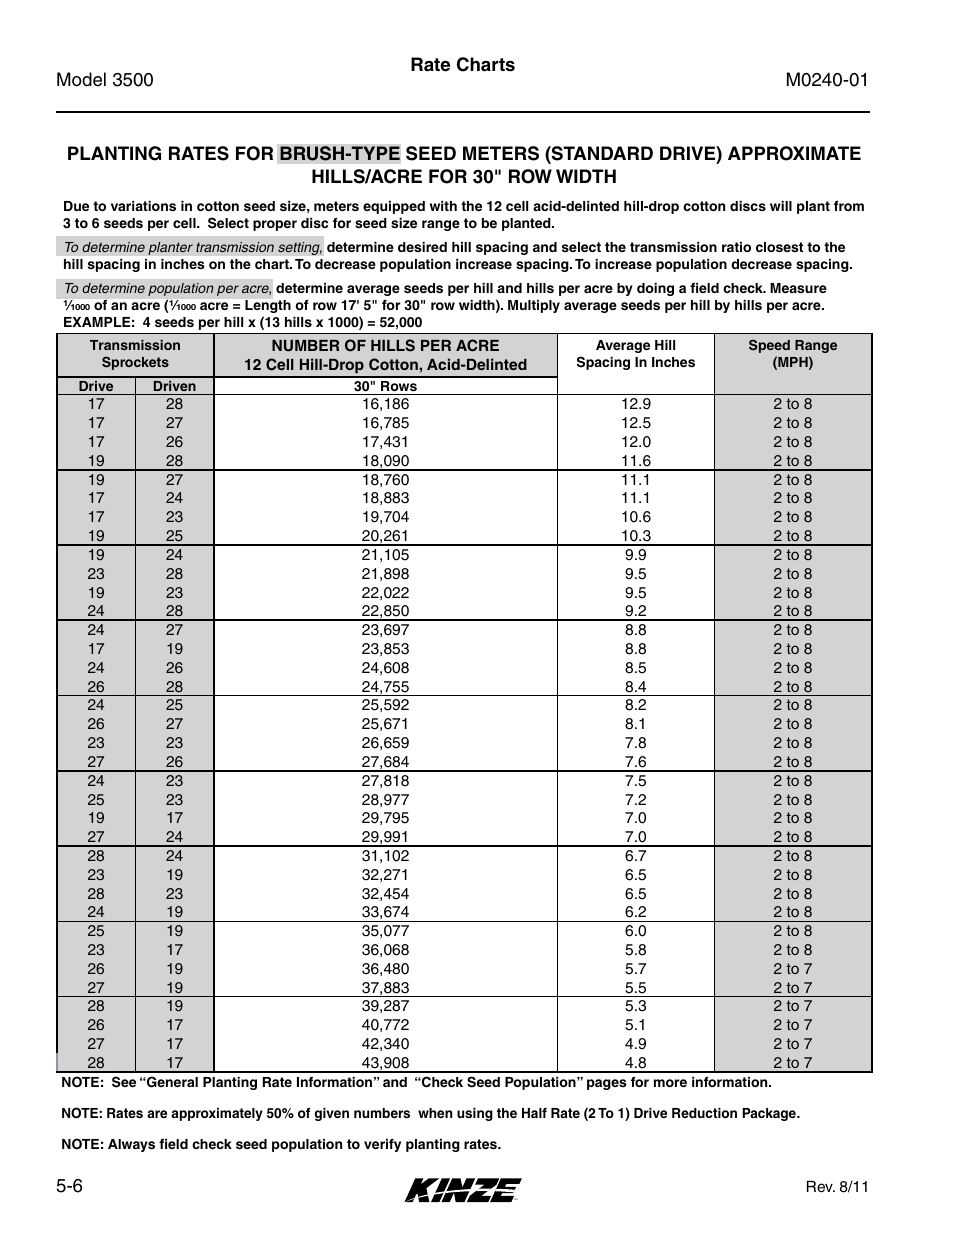 Kinze 3500 Lift and Rotate Planter Rev. 7/14 User Manual | Page 76 / 140